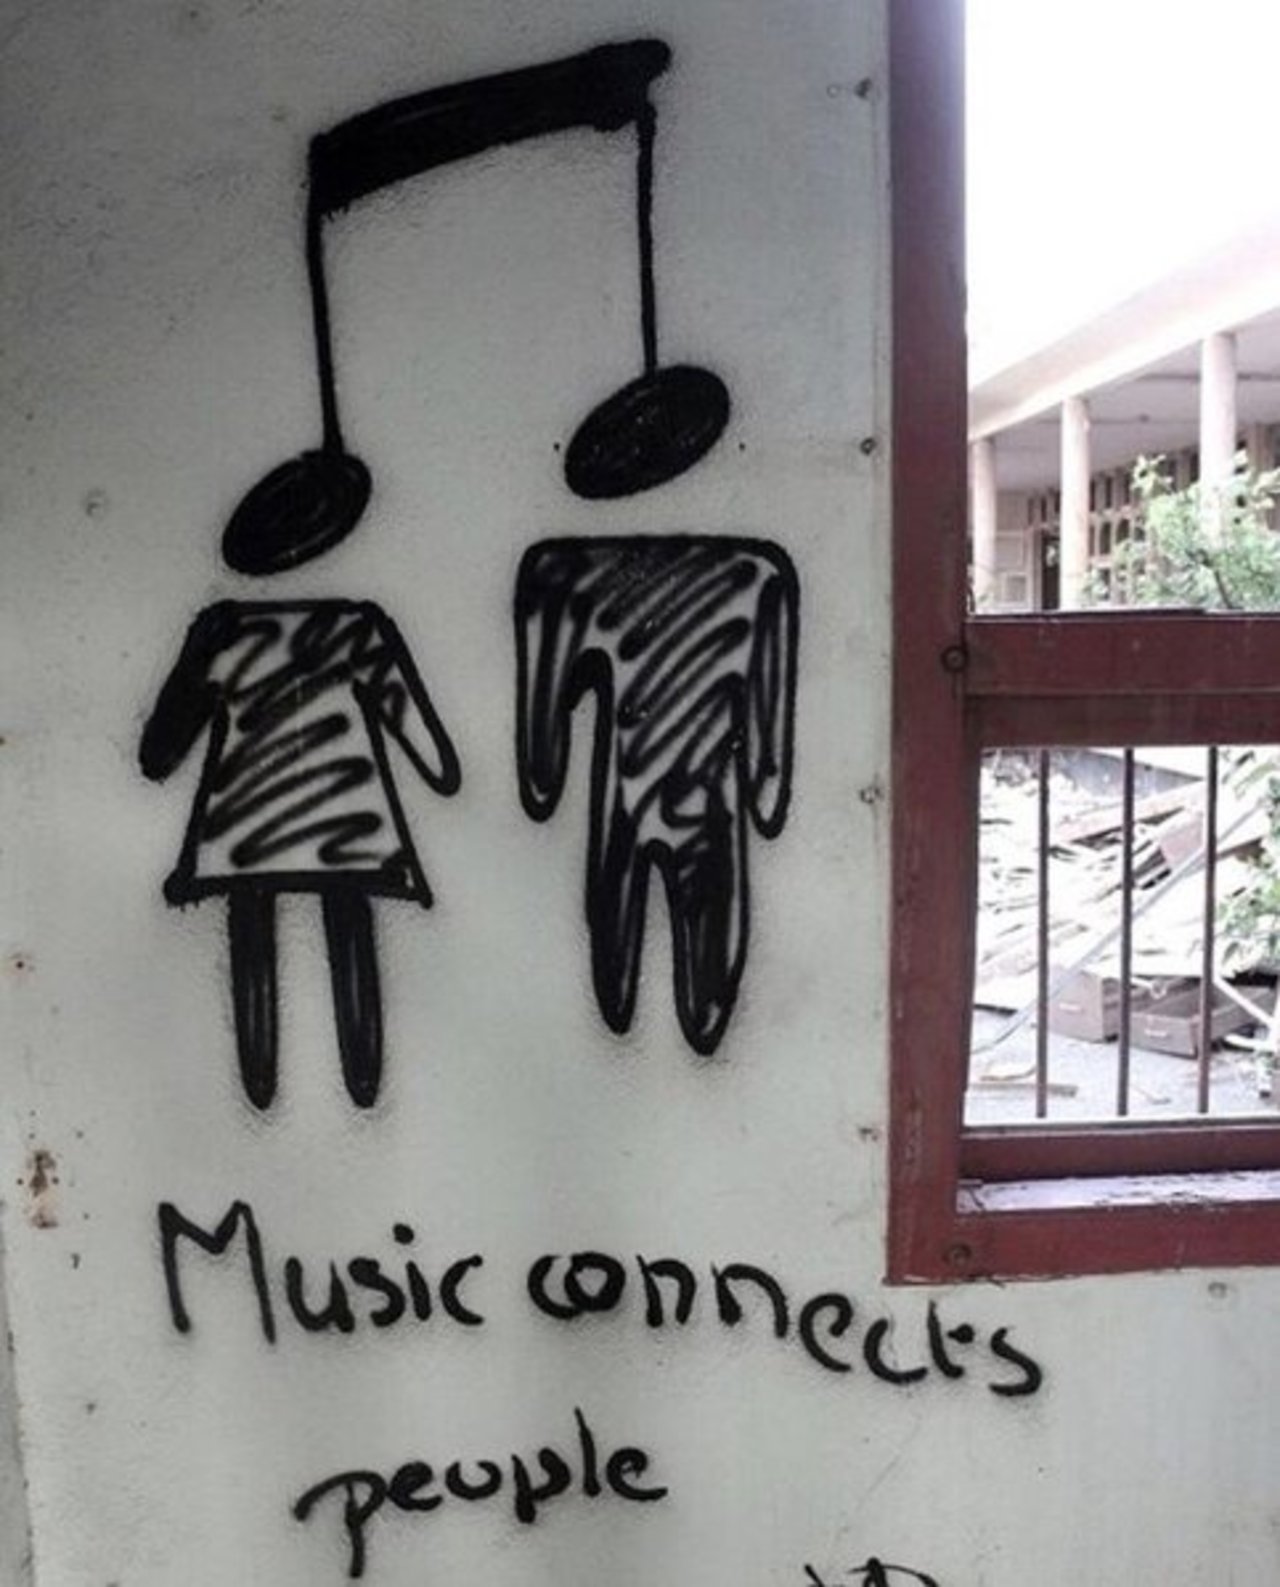 Comment a song that connects you to someone in your life (and tag them)! -- #globalstreetart #streetart #graffiti #wallart https://t.co/iT8zZRwRSu